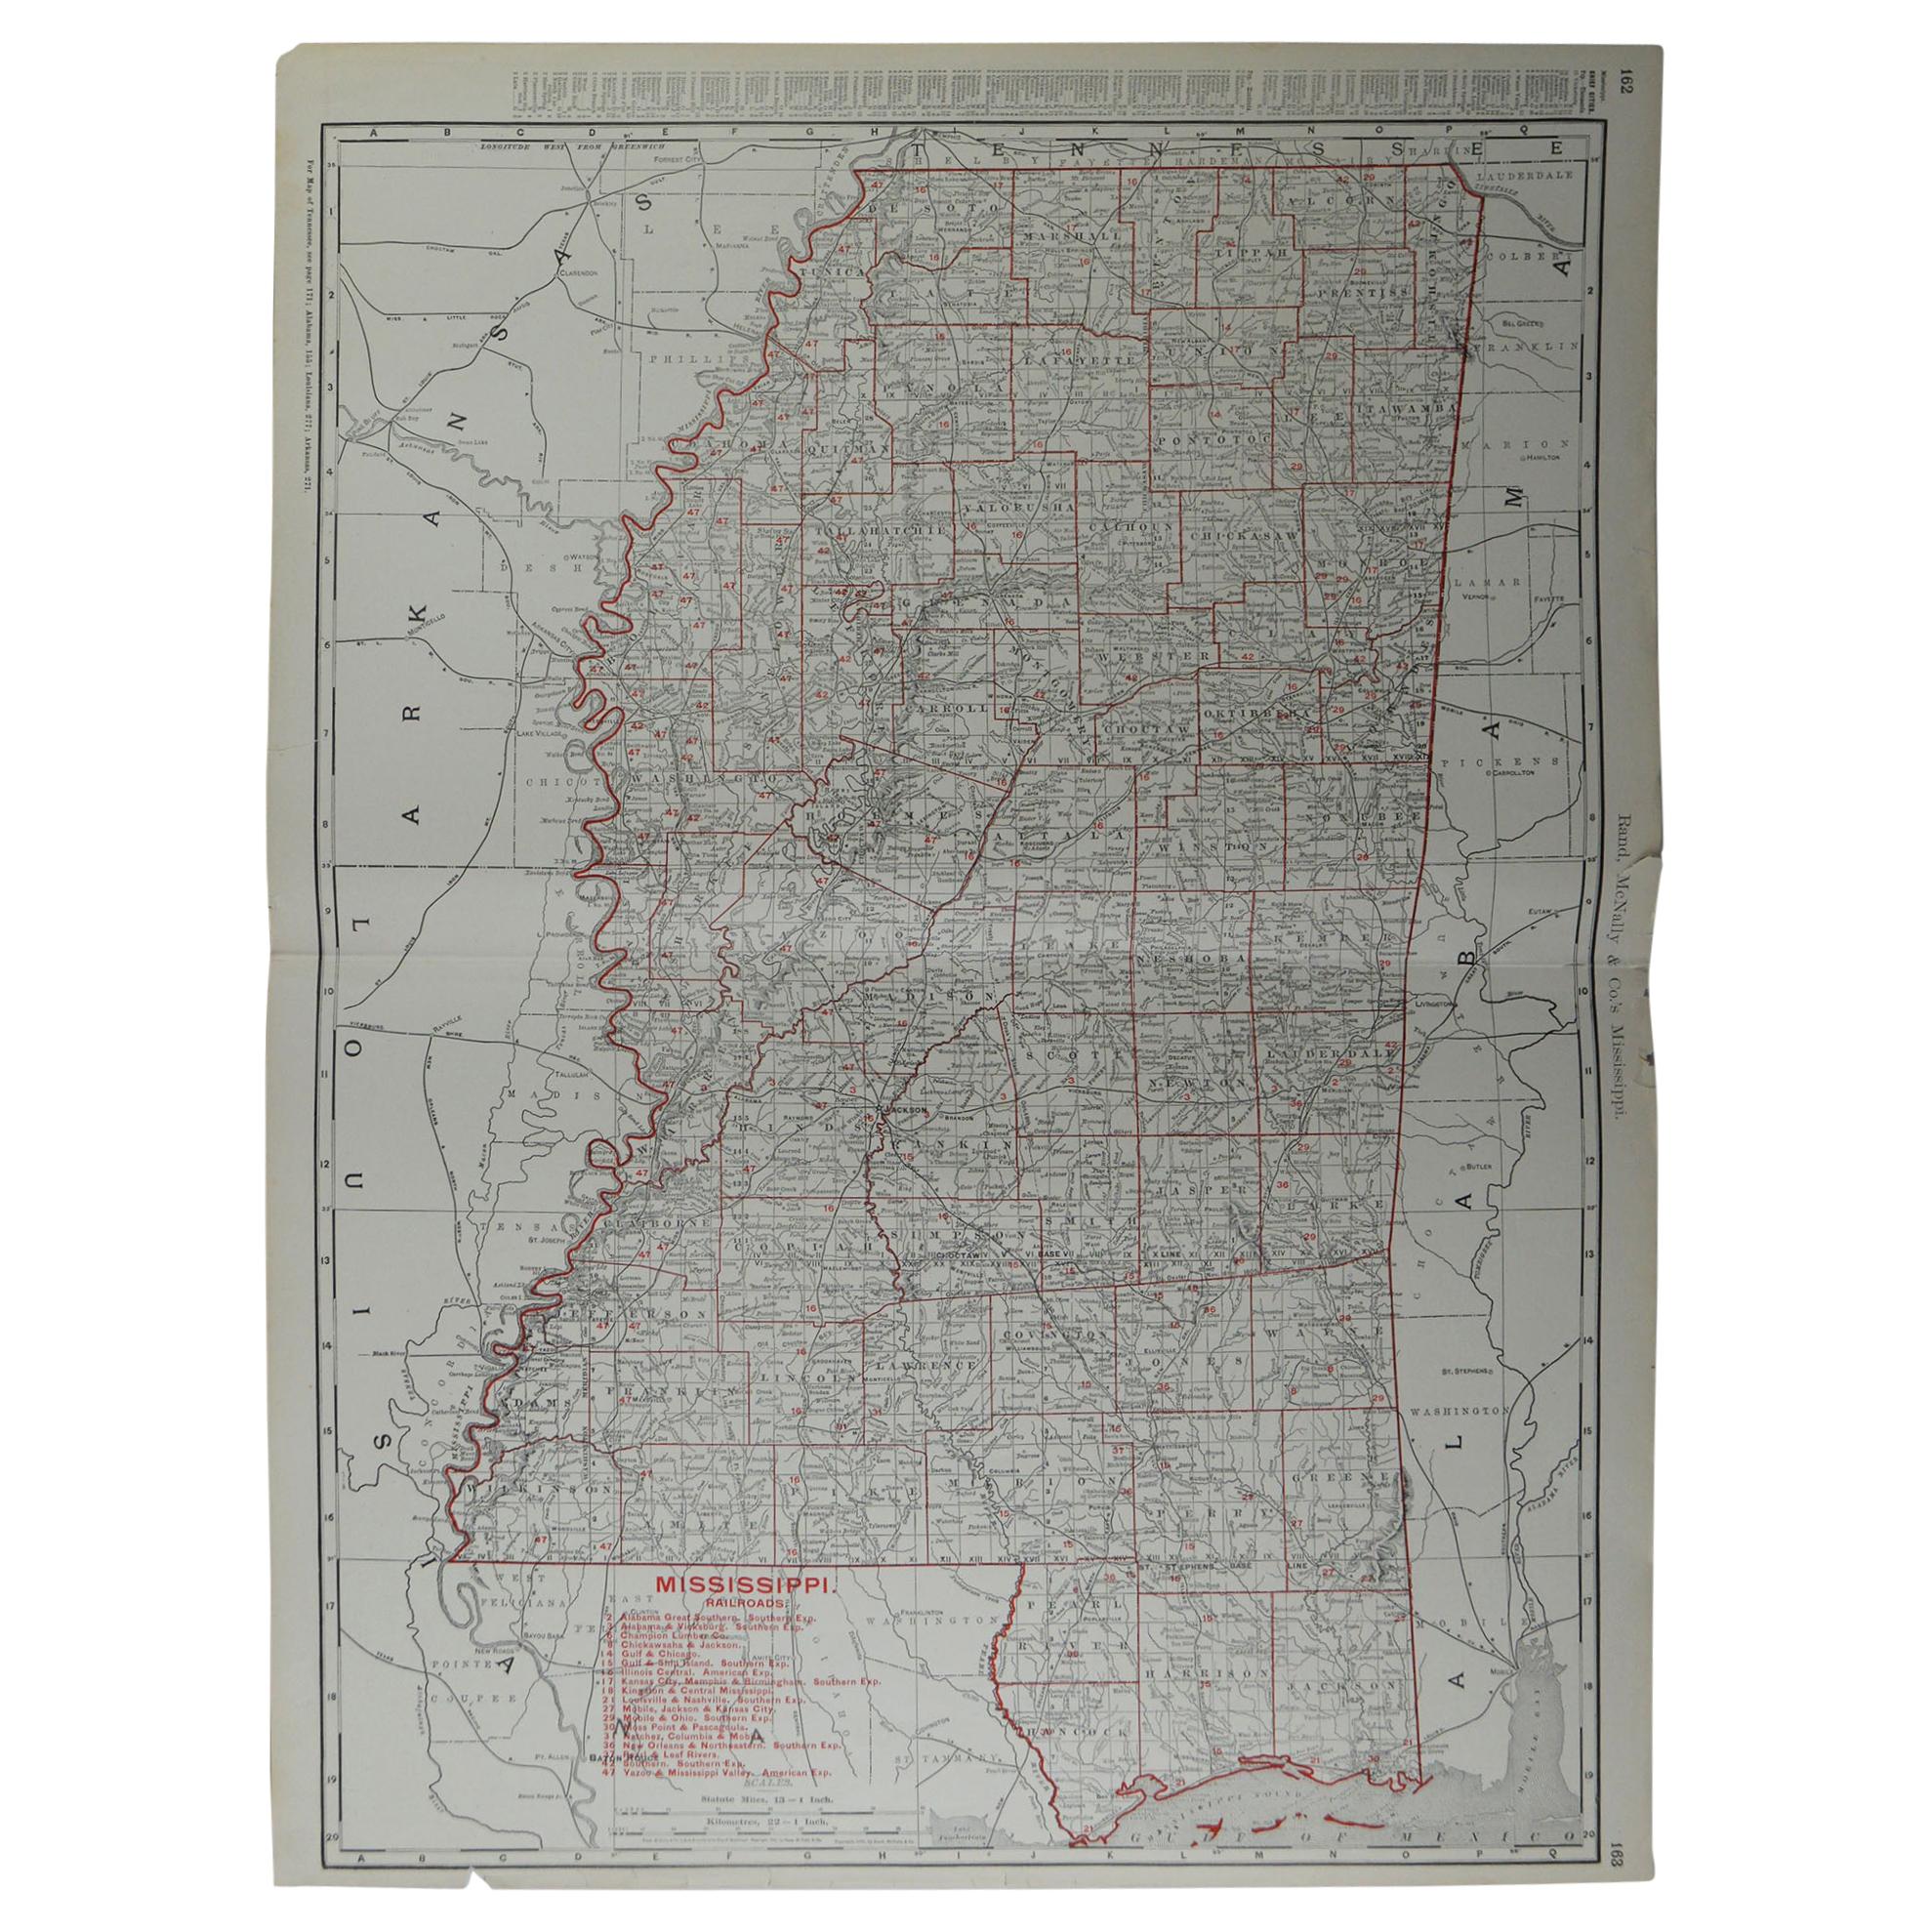 Large Original Antique Map of Mississippi by Rand McNally, circa 1900